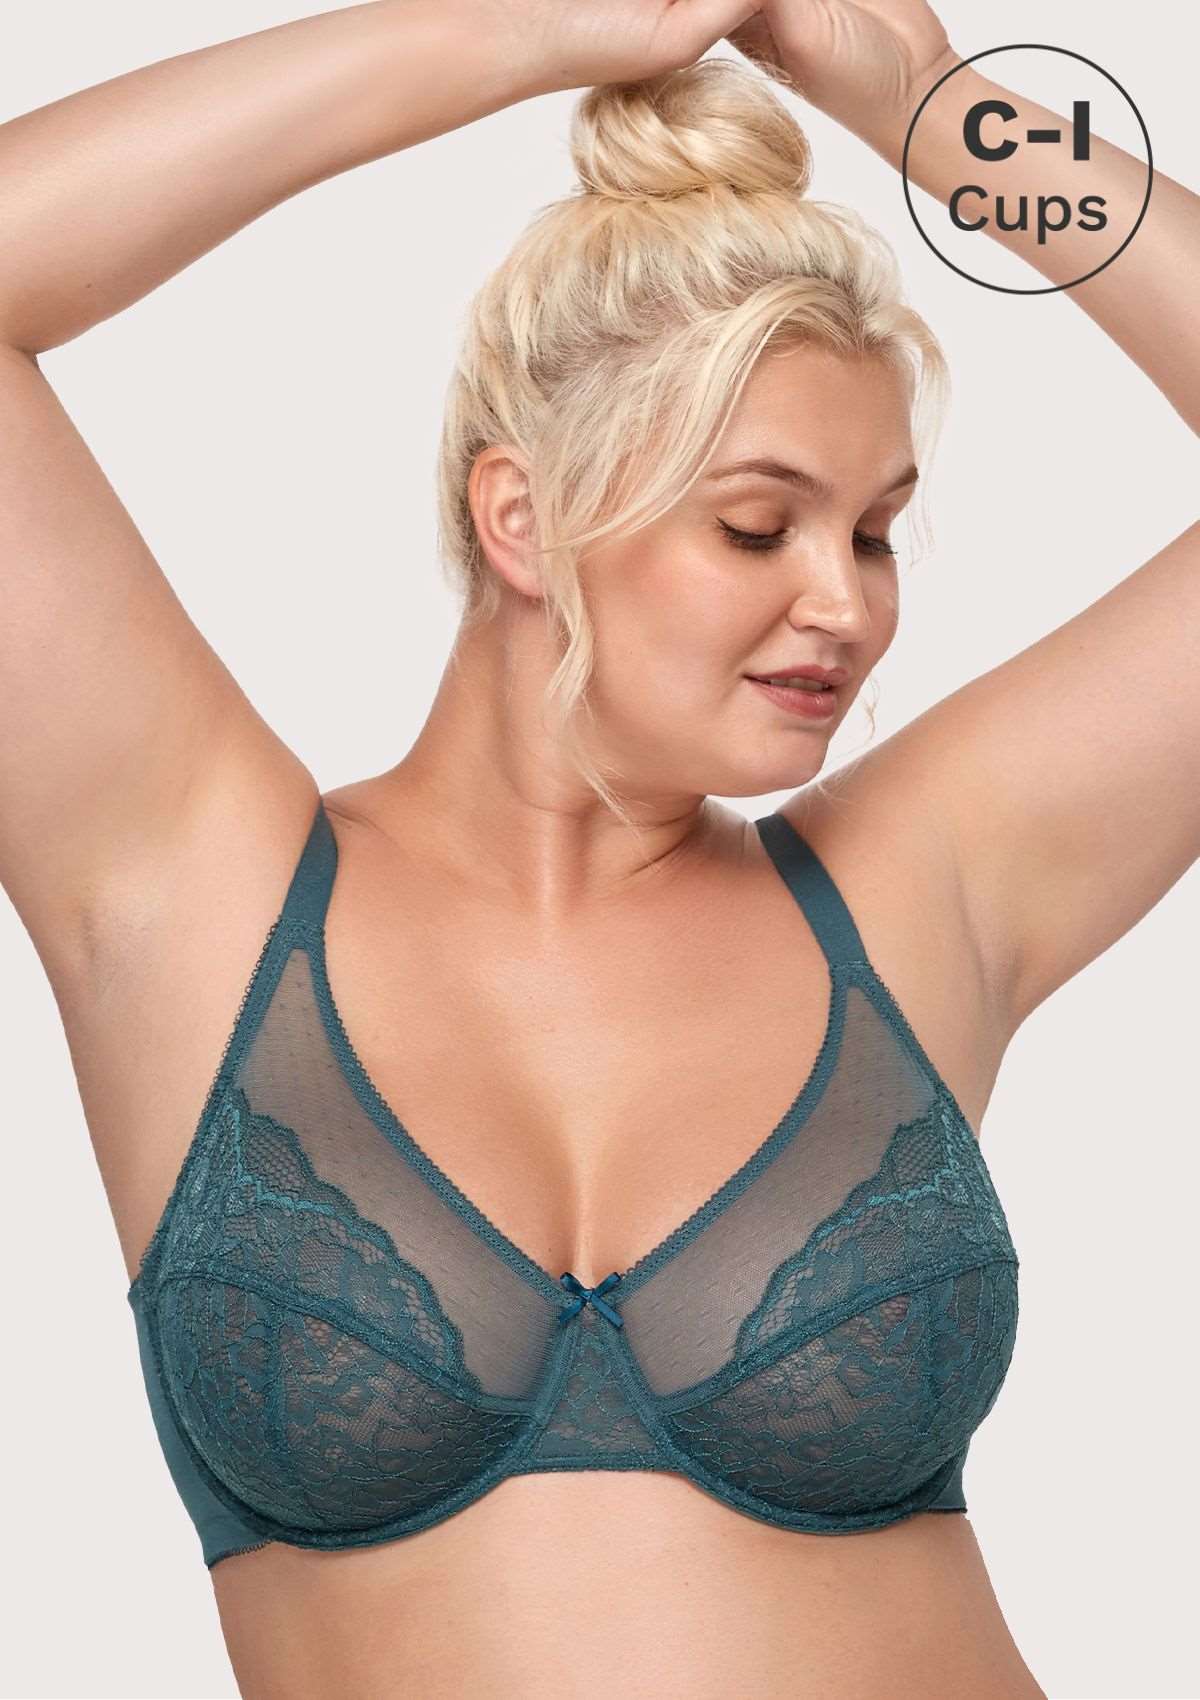 HSIA Enchante Full Coverage Bra: Supportive Bra For Big Busts - Balsam Blue / 38 / C